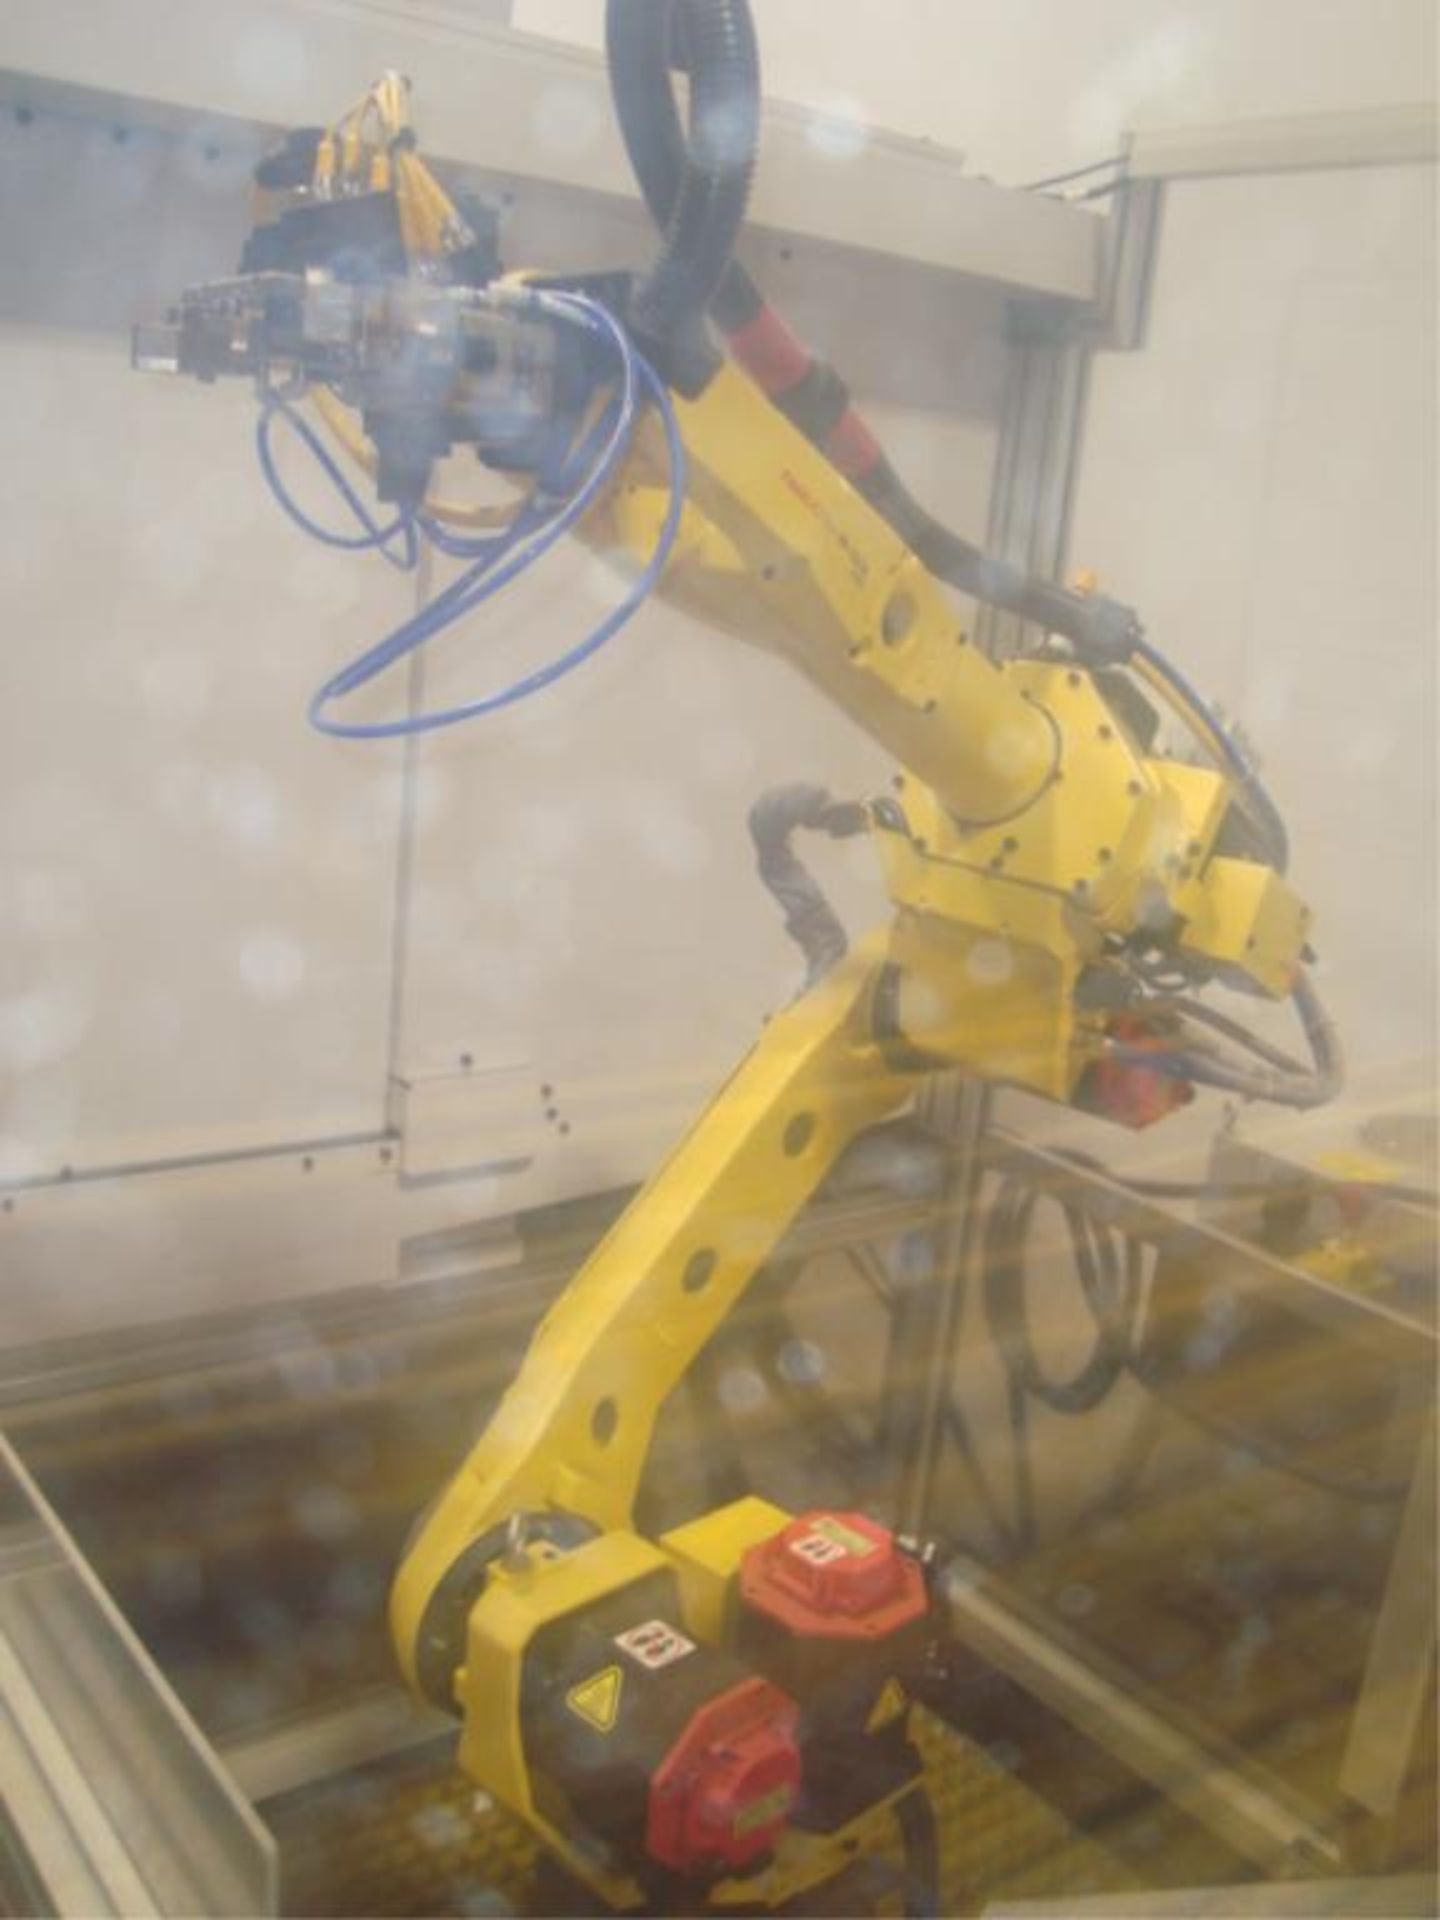 Fanuc Robodrill Alpha-D21MiA5 with Fanuc M-10iA 6-Axis Robot - Image 9 of 60